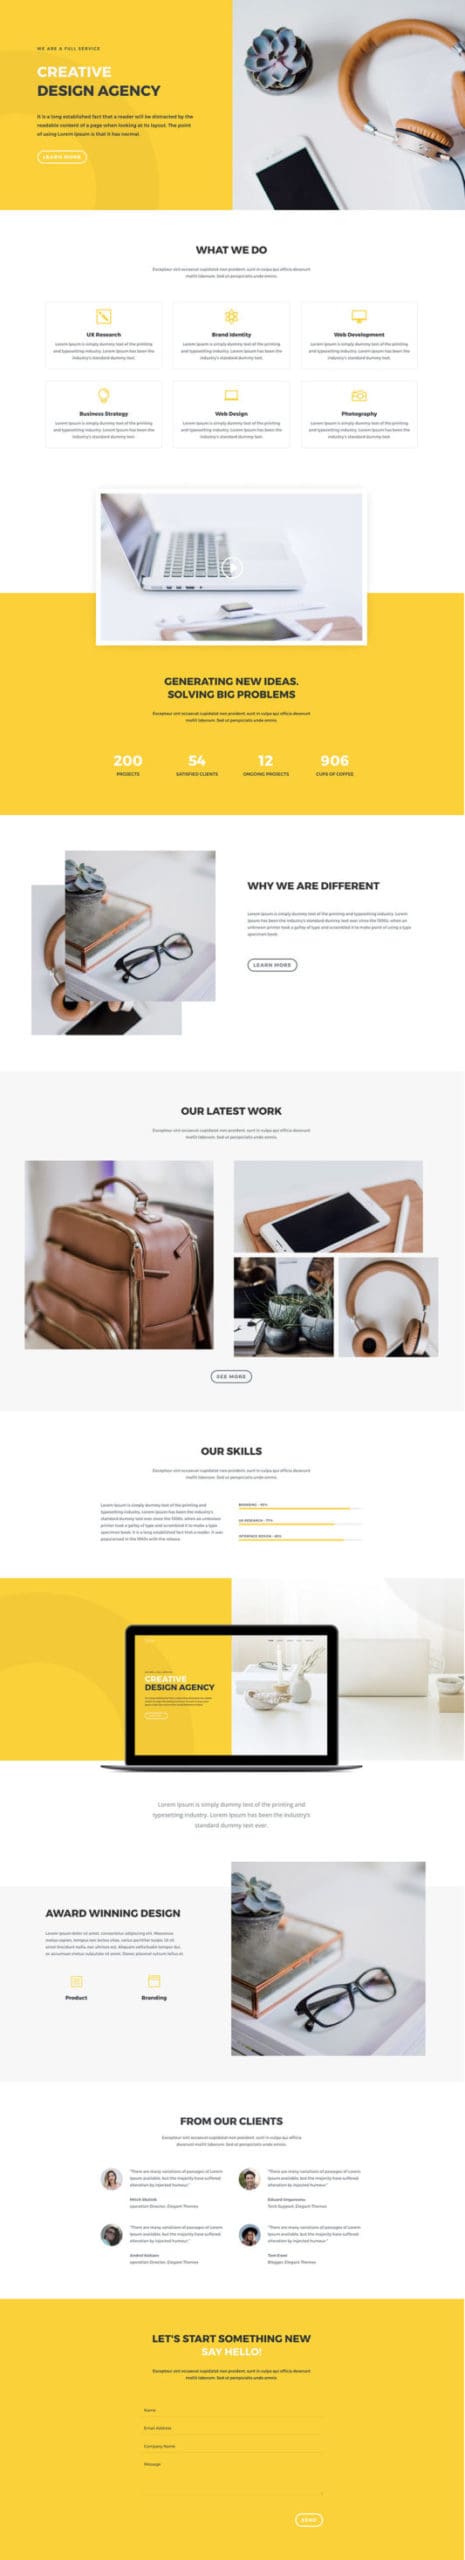 Design Agency Home Page - full page